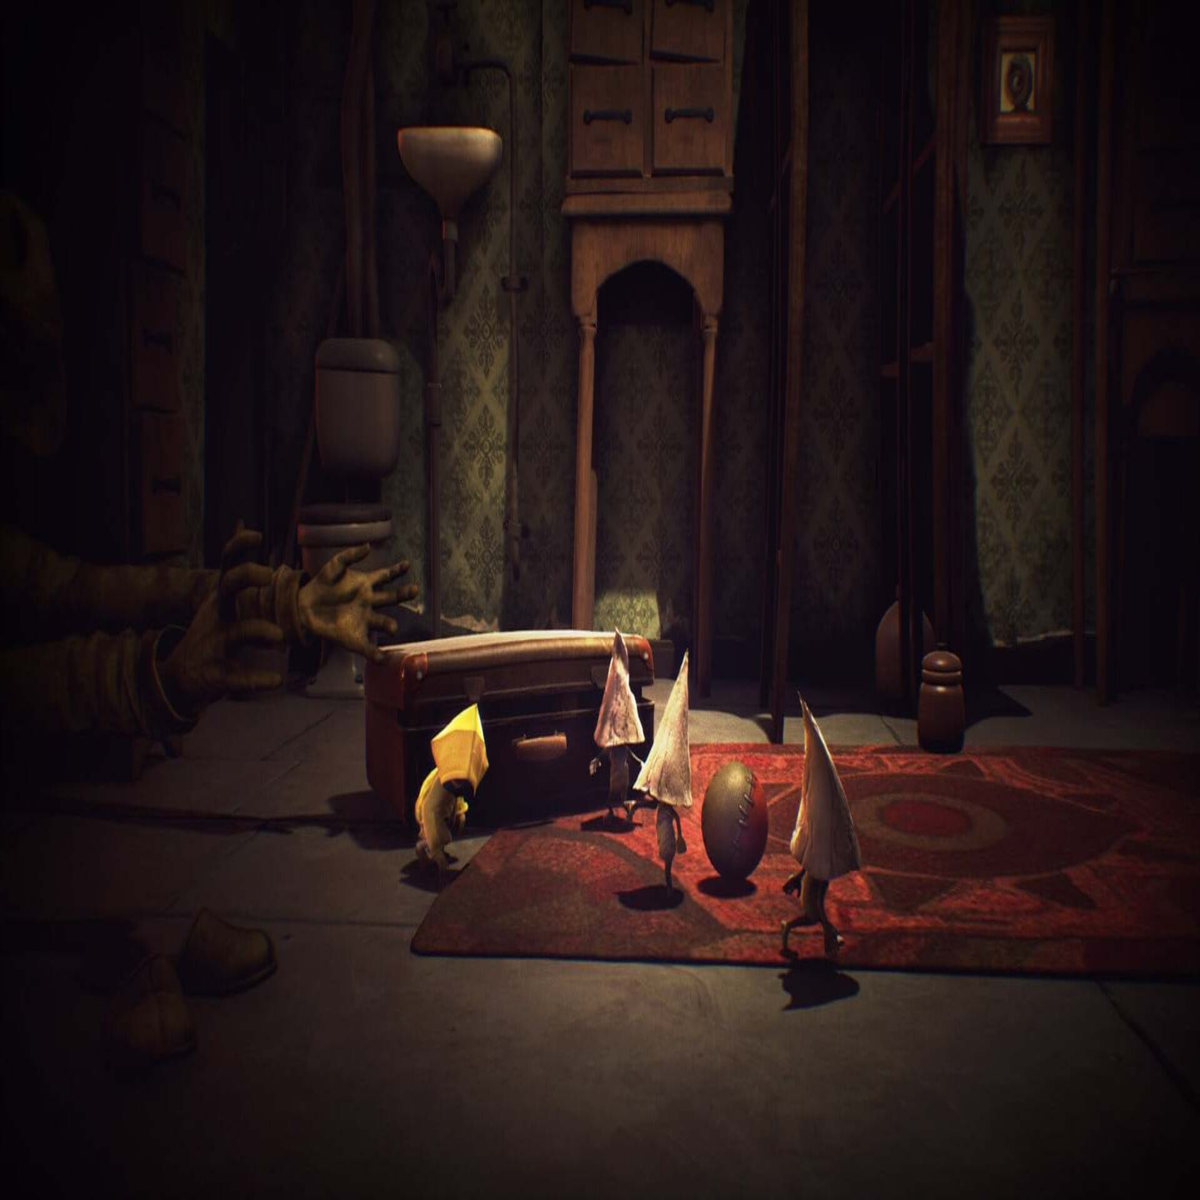 Little Nightmares is finally set to receive a mobile port, and